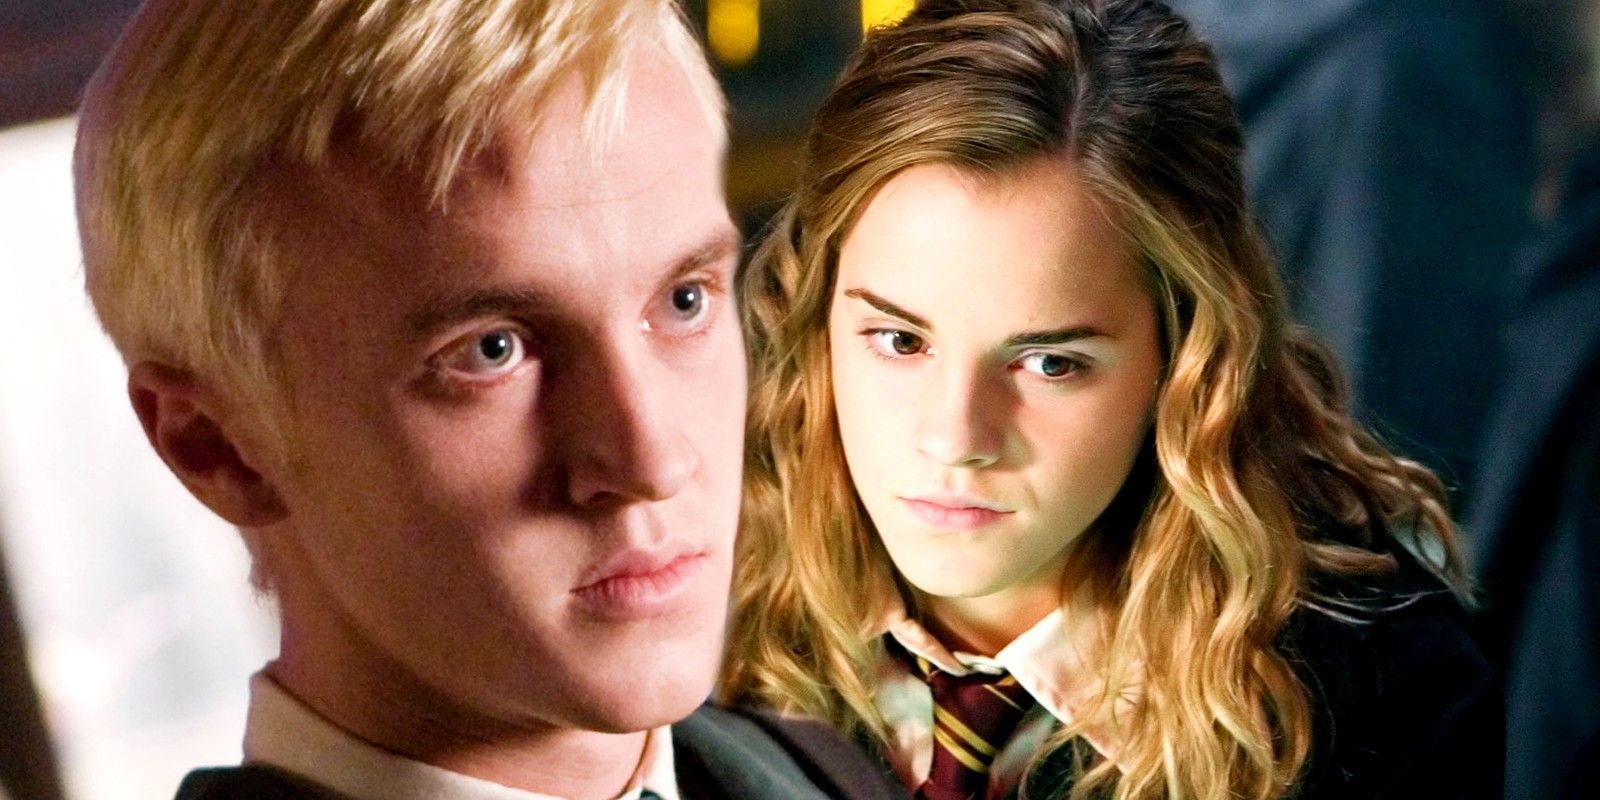 Epic Harry Potter Art Imagines If Hermione Granger & Draco Malfoy Were A  Couple